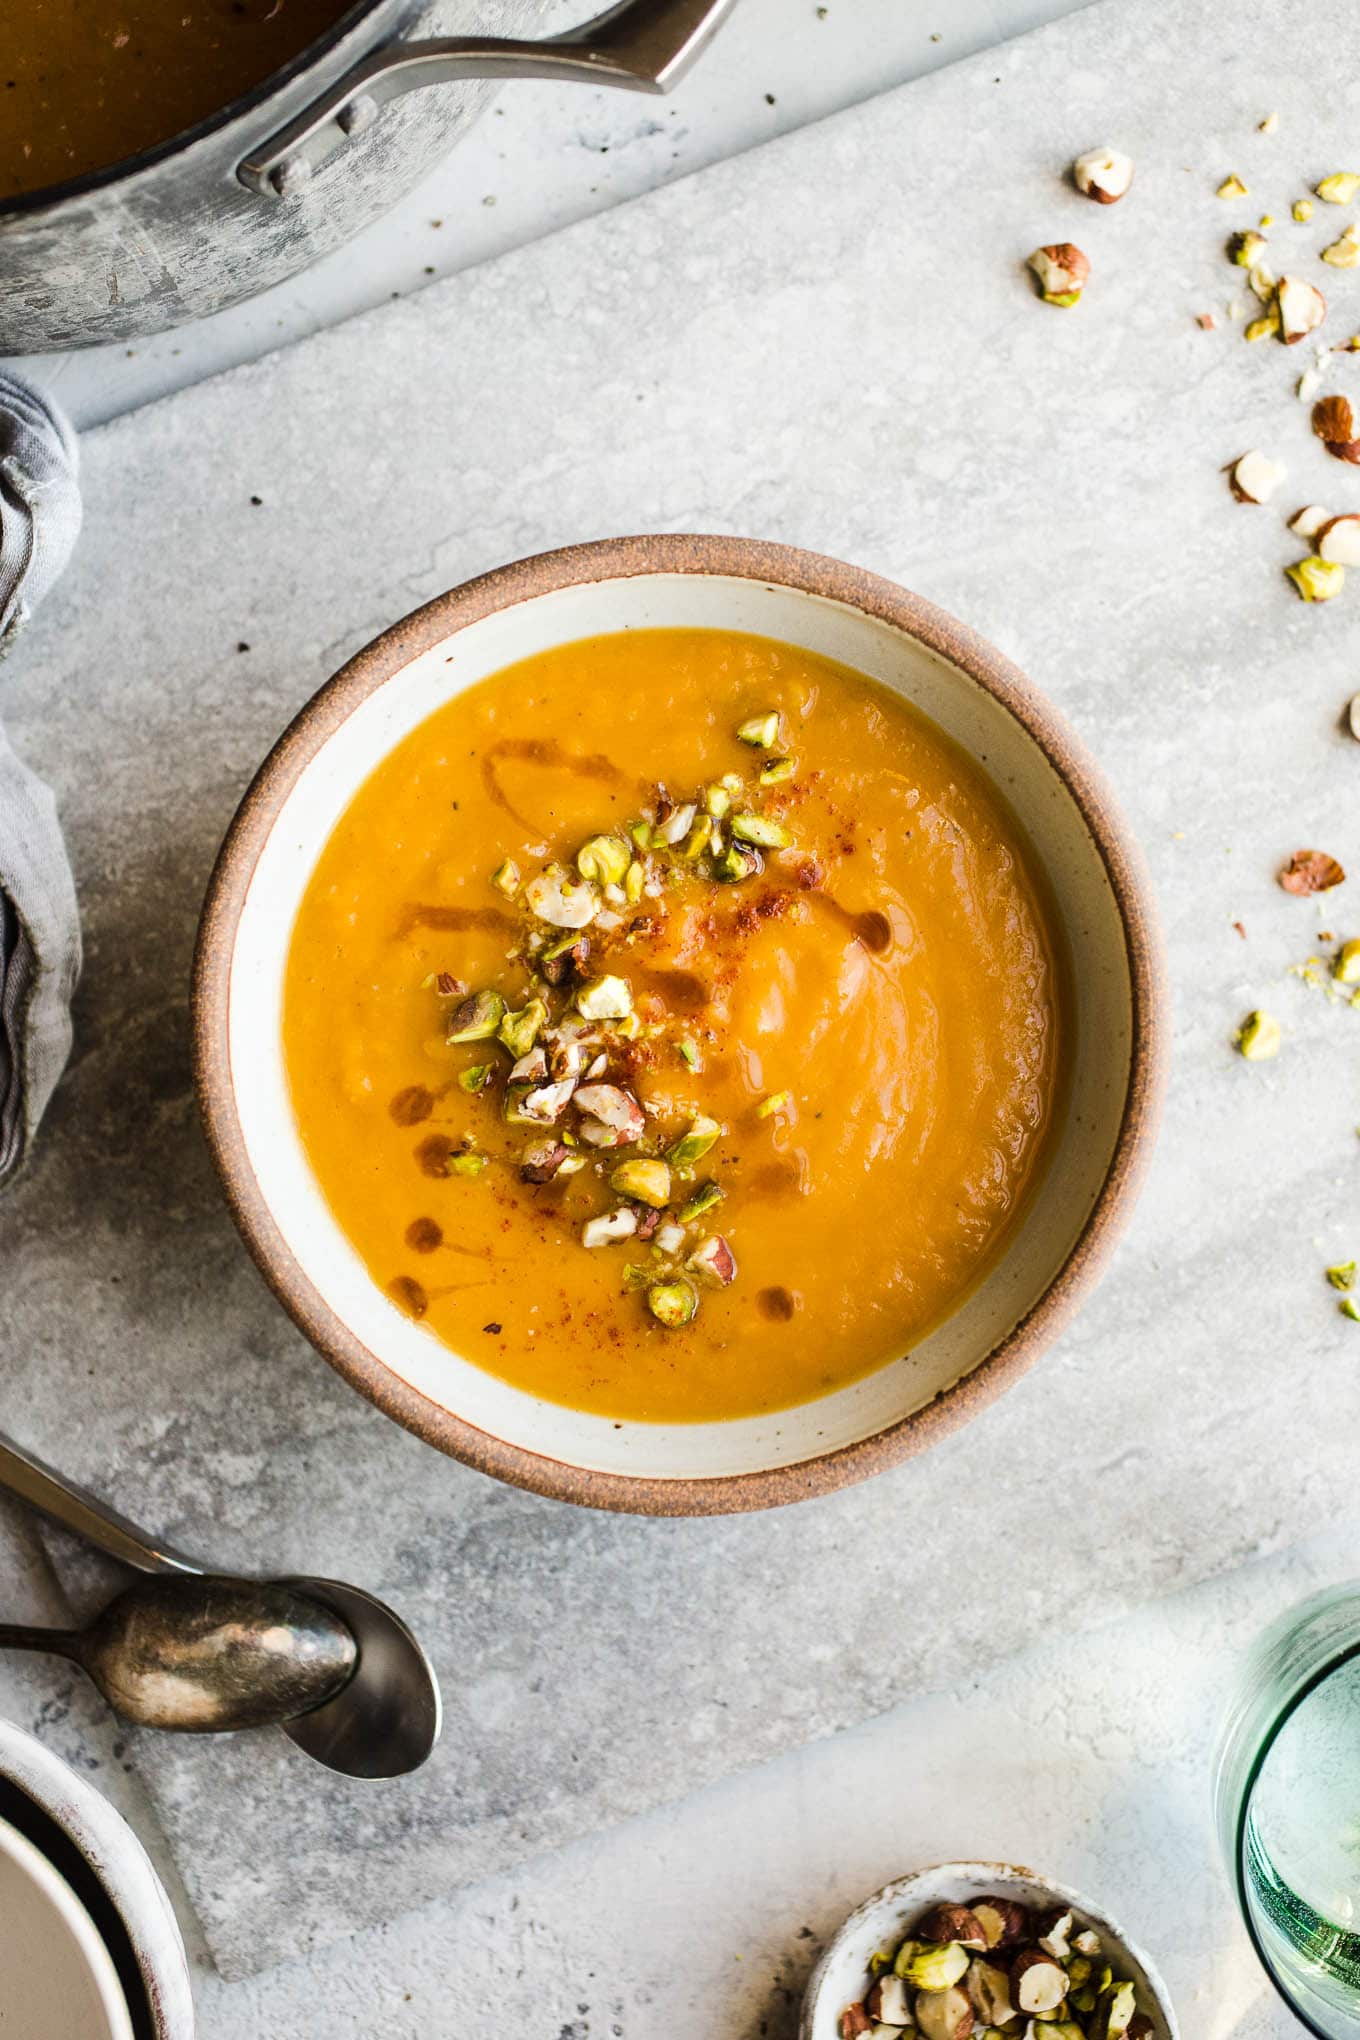 Creamy Vegan Sweet Potato Soup is gluten-free and ready in just 30 minutes. Made with minimal ingredients and warming spices for a spicy sweet soup.